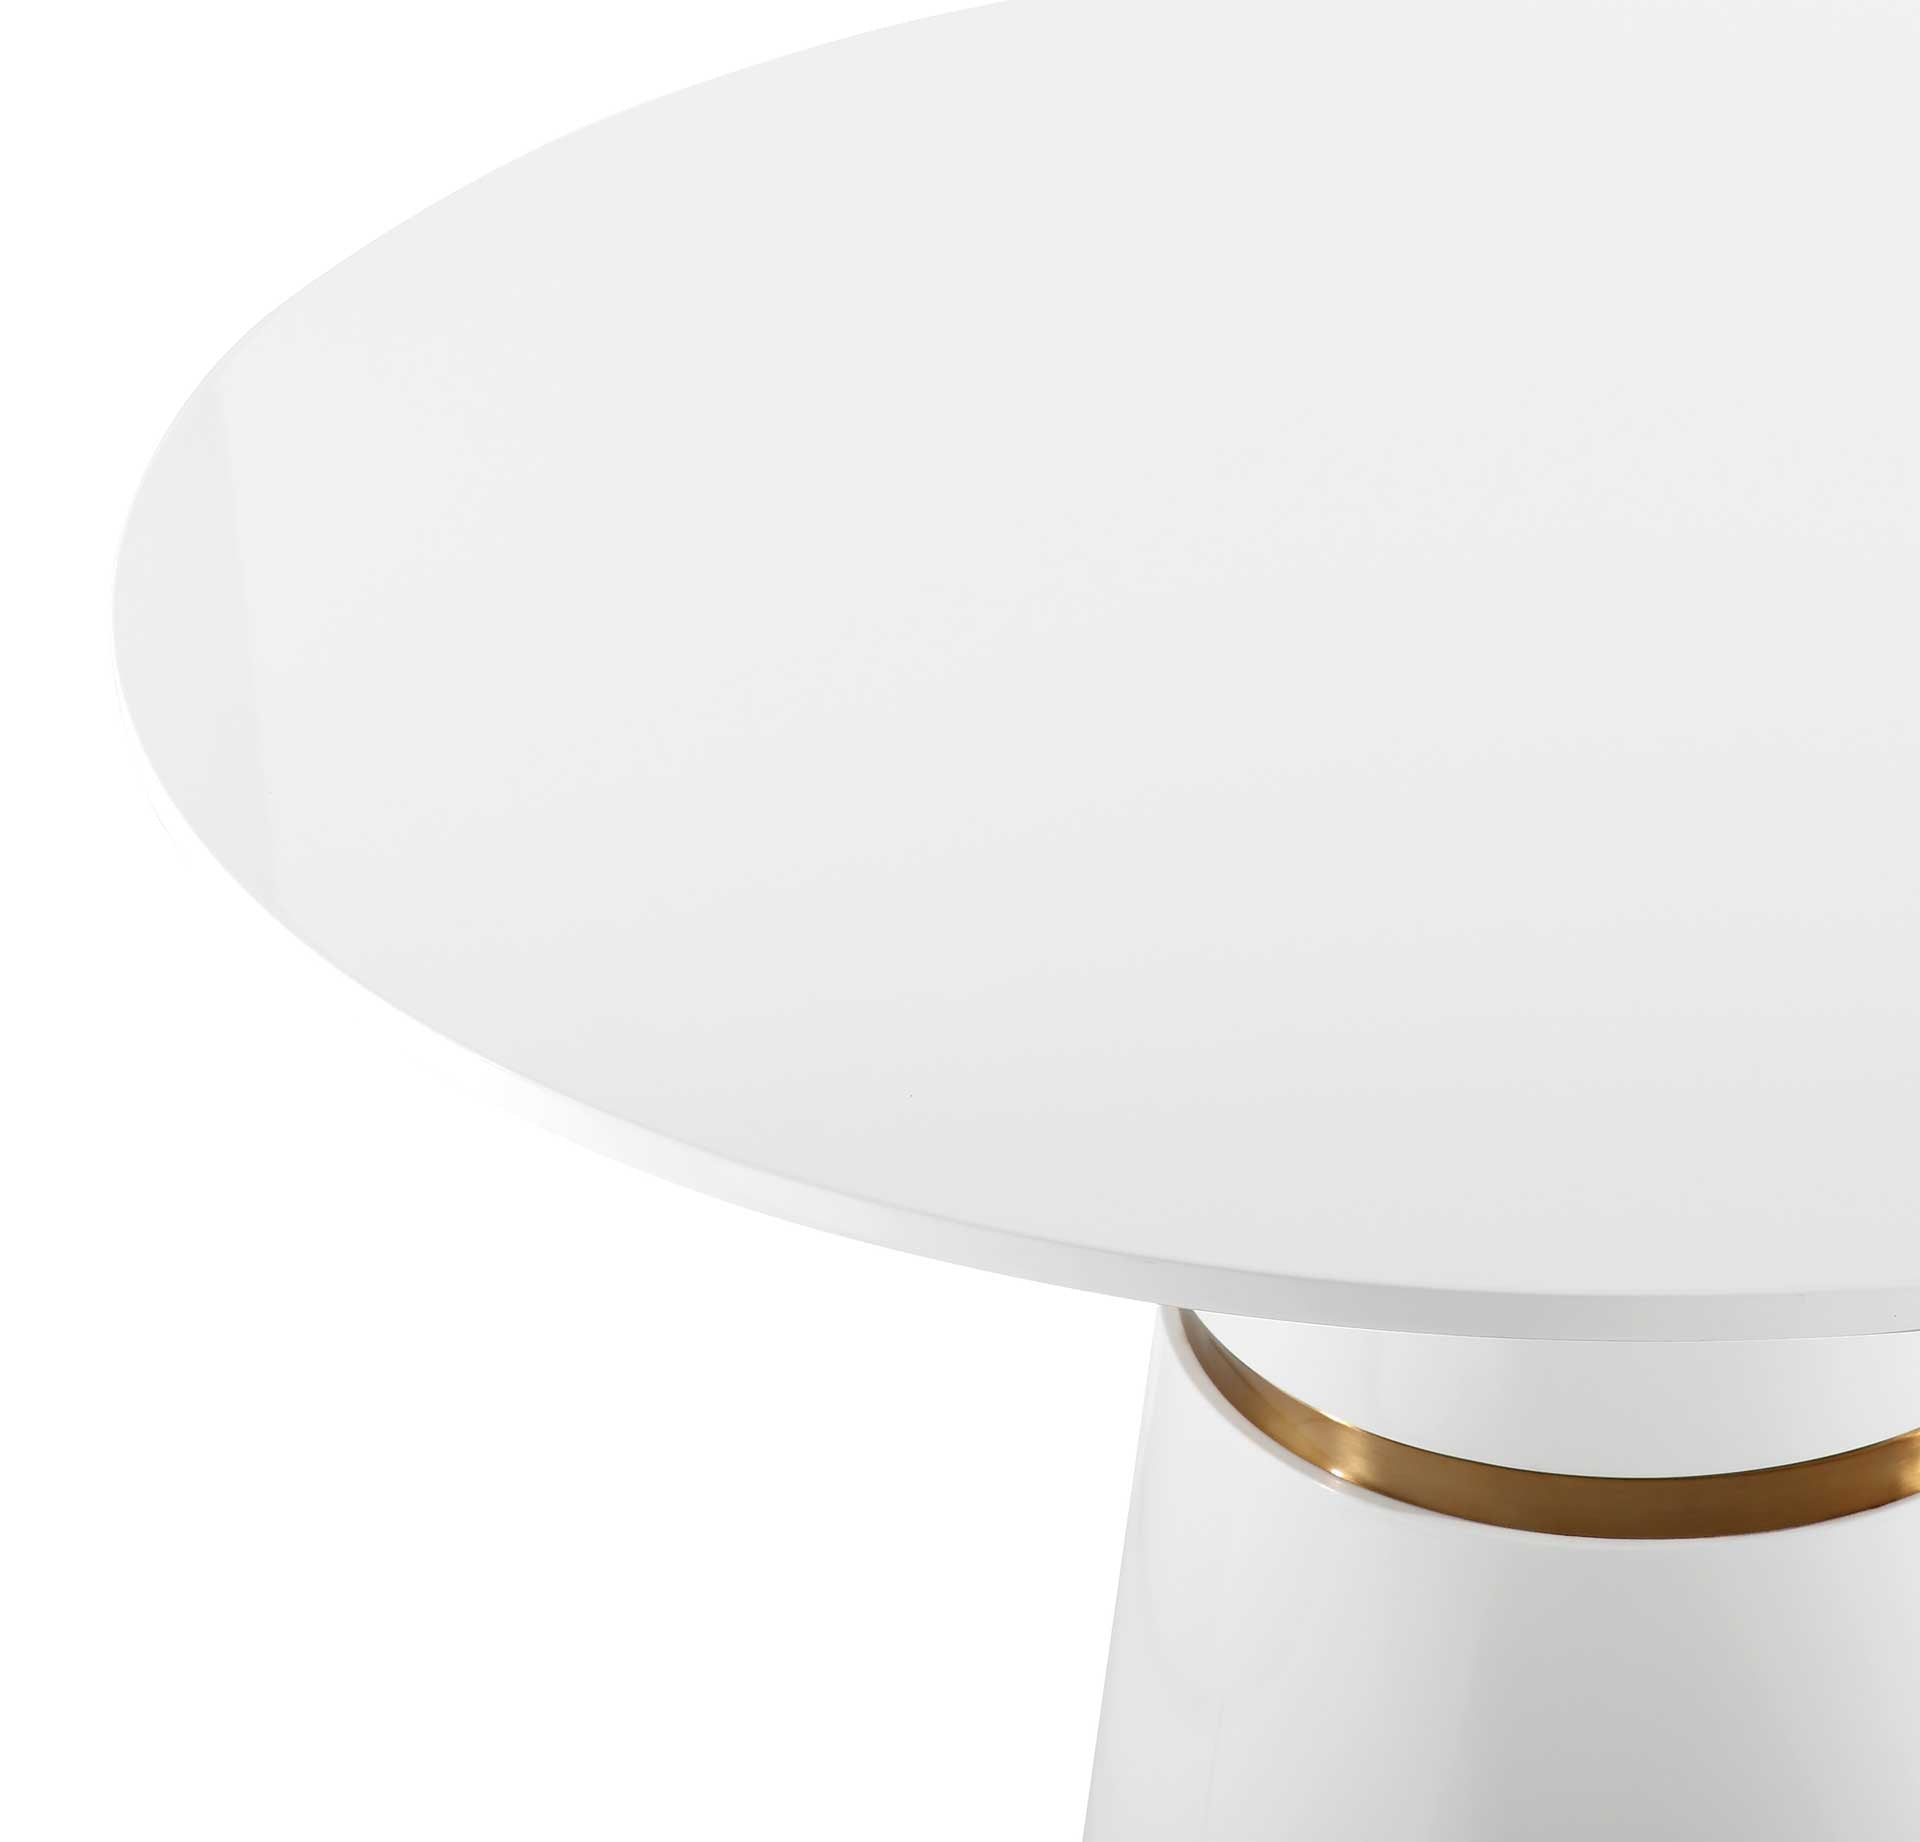 Rogelio Dining Table White